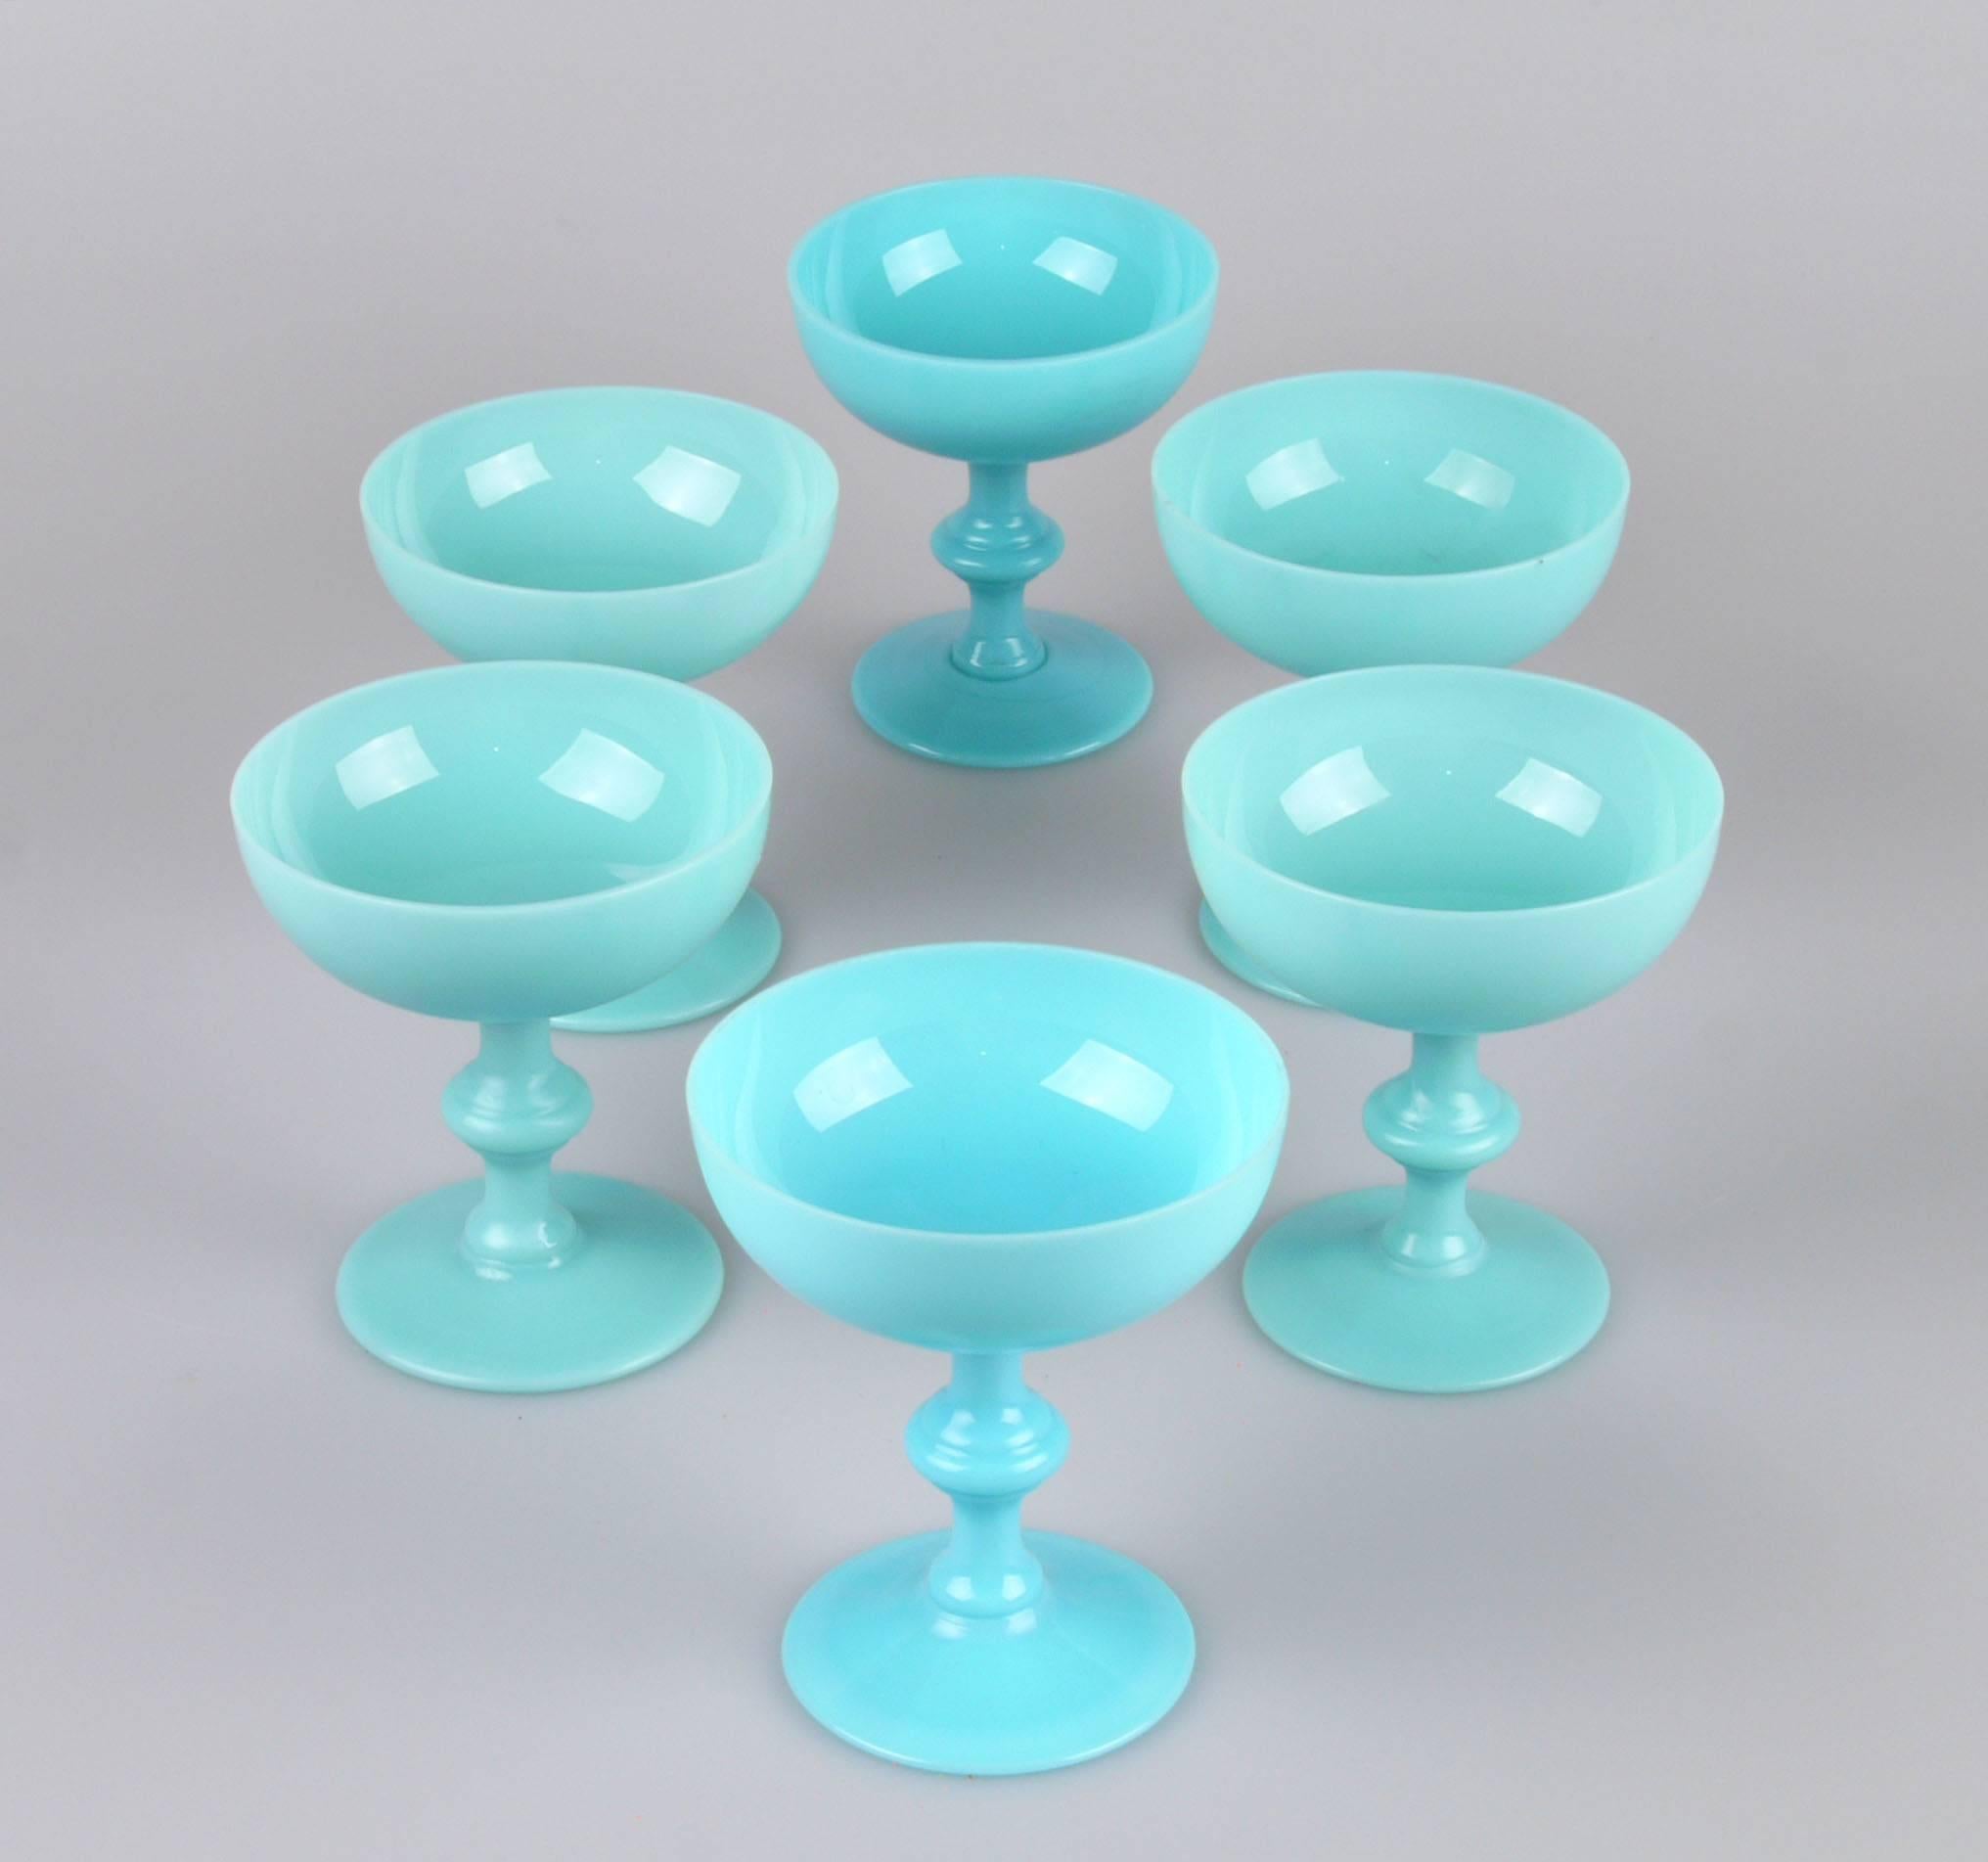 Set of six Vintage French Neoclassical blue opaline sherbet cups. Two cups have a slightly different blue tone.
Great for serving Ice Cream or Desert when hosting Family.
Graceful Gift Idea for the Holiday Season.  